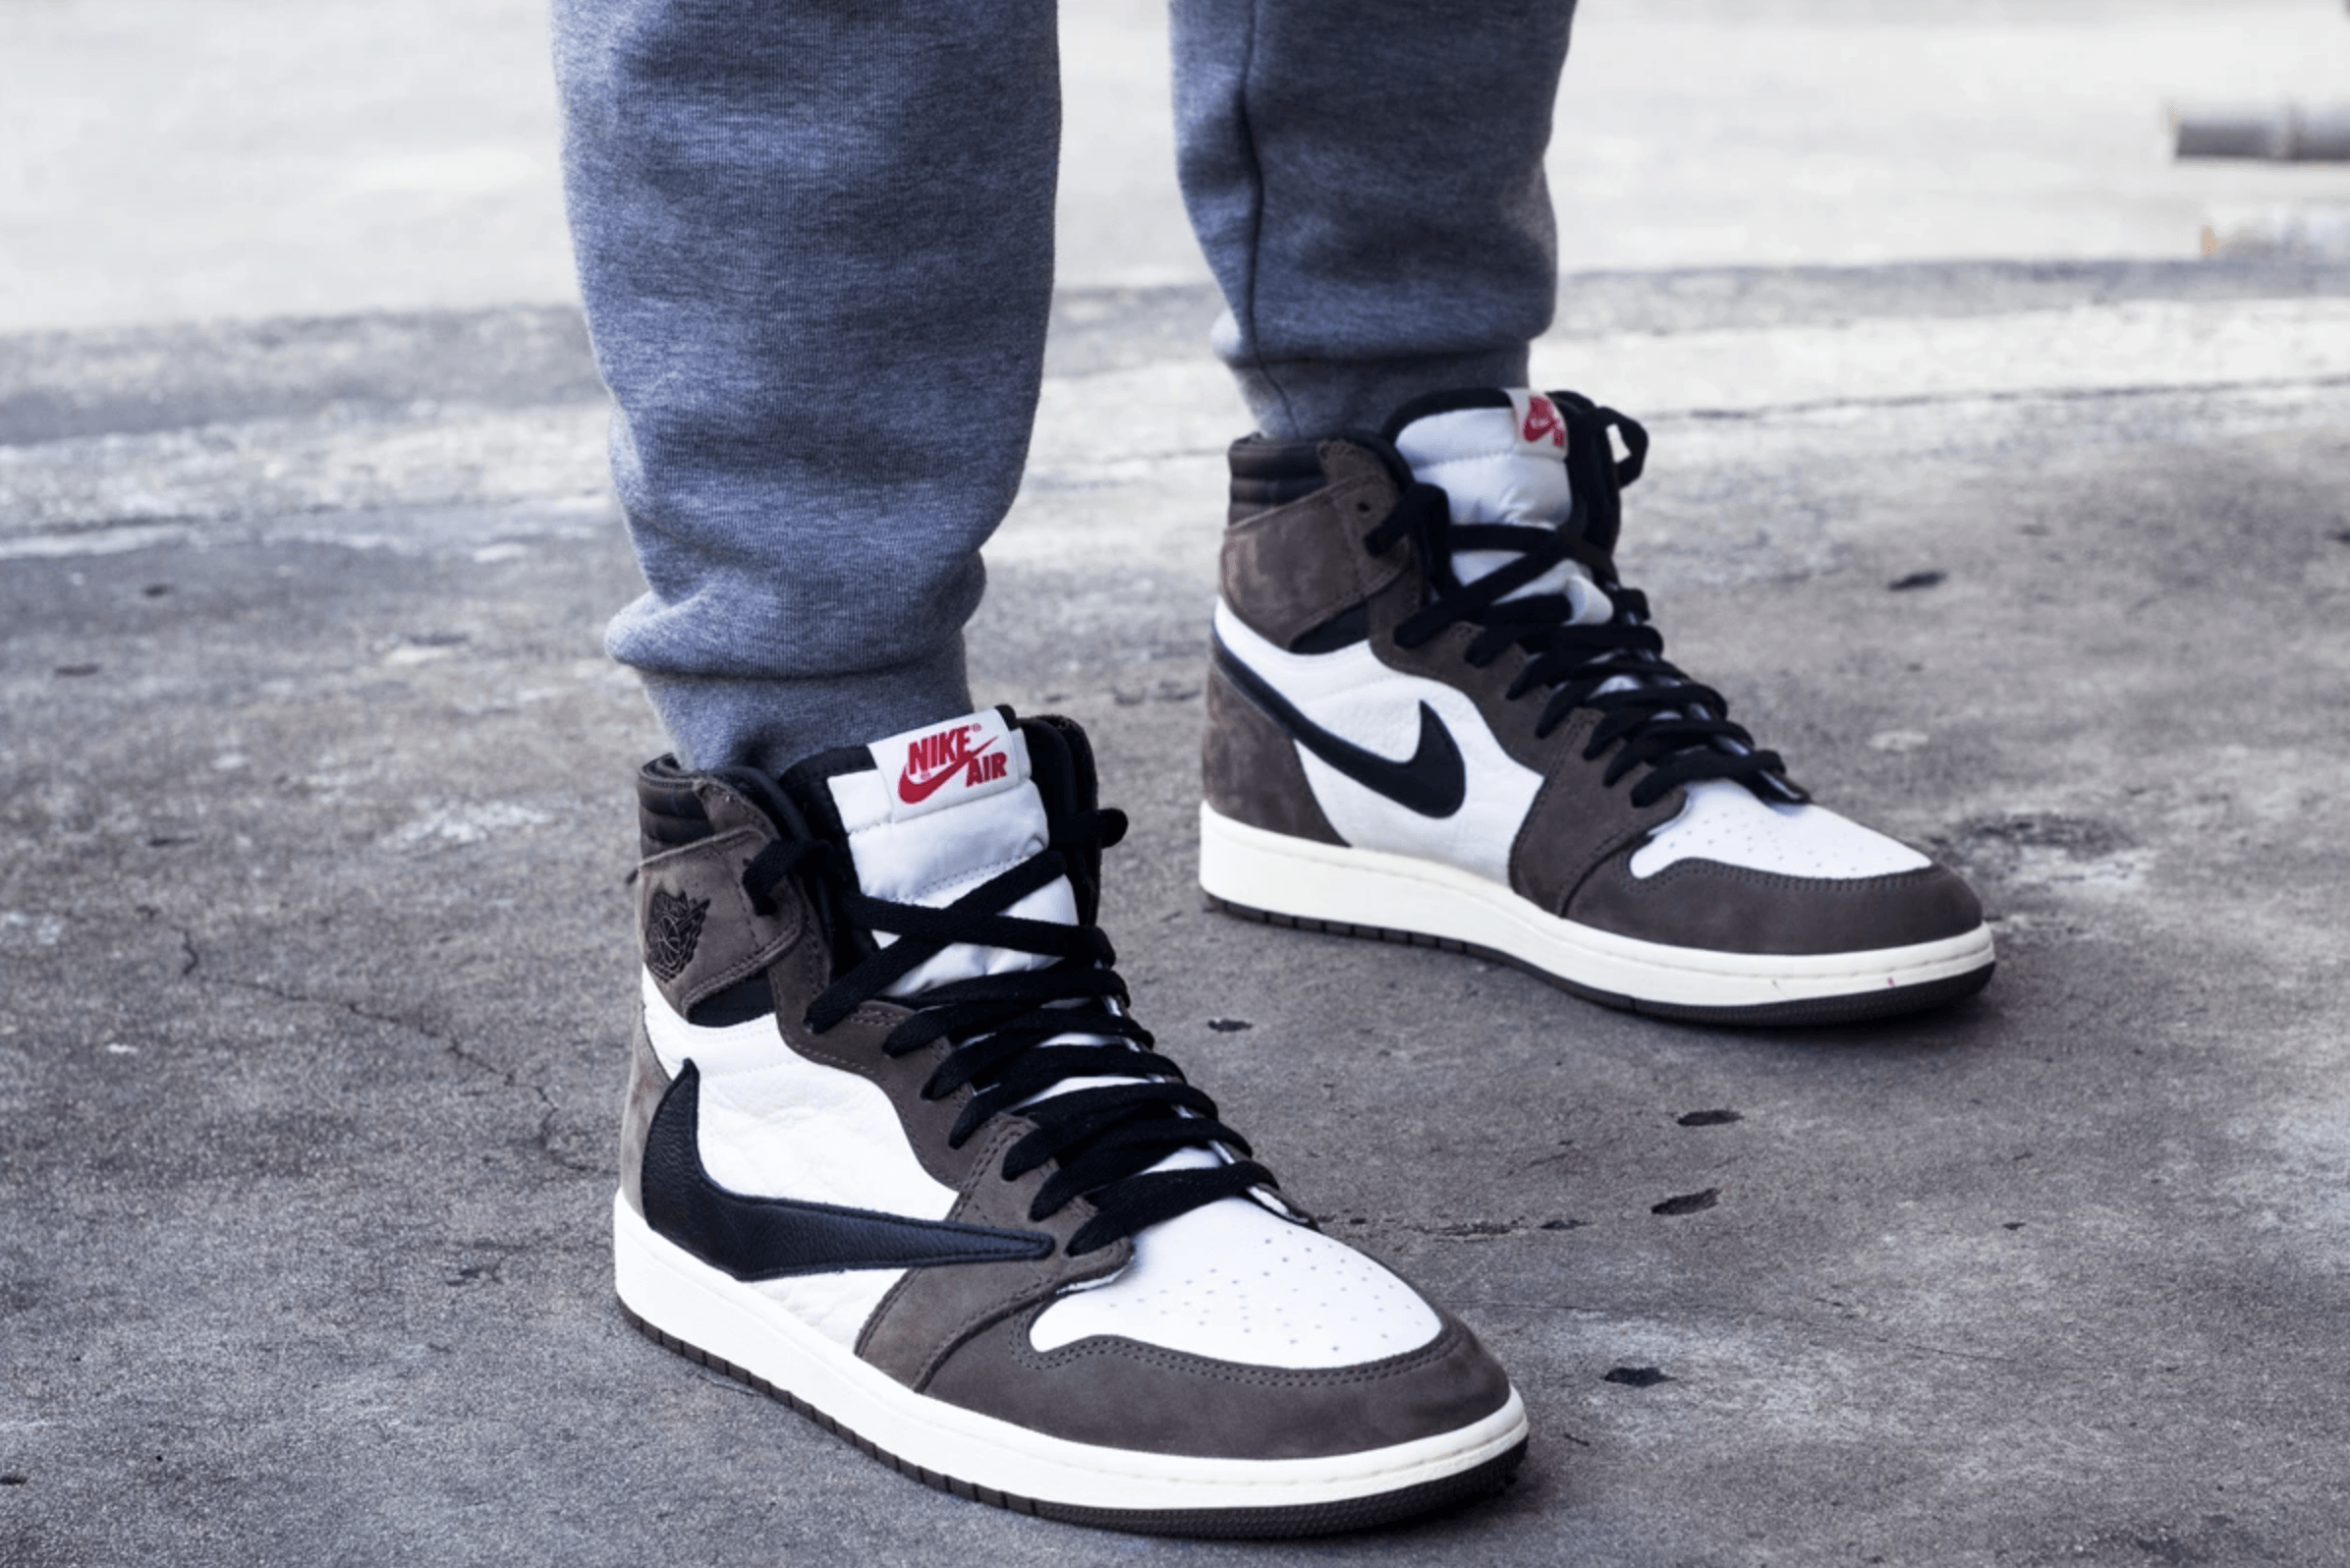 Discover the new image of the Air Jordan 1 Cactus Jack